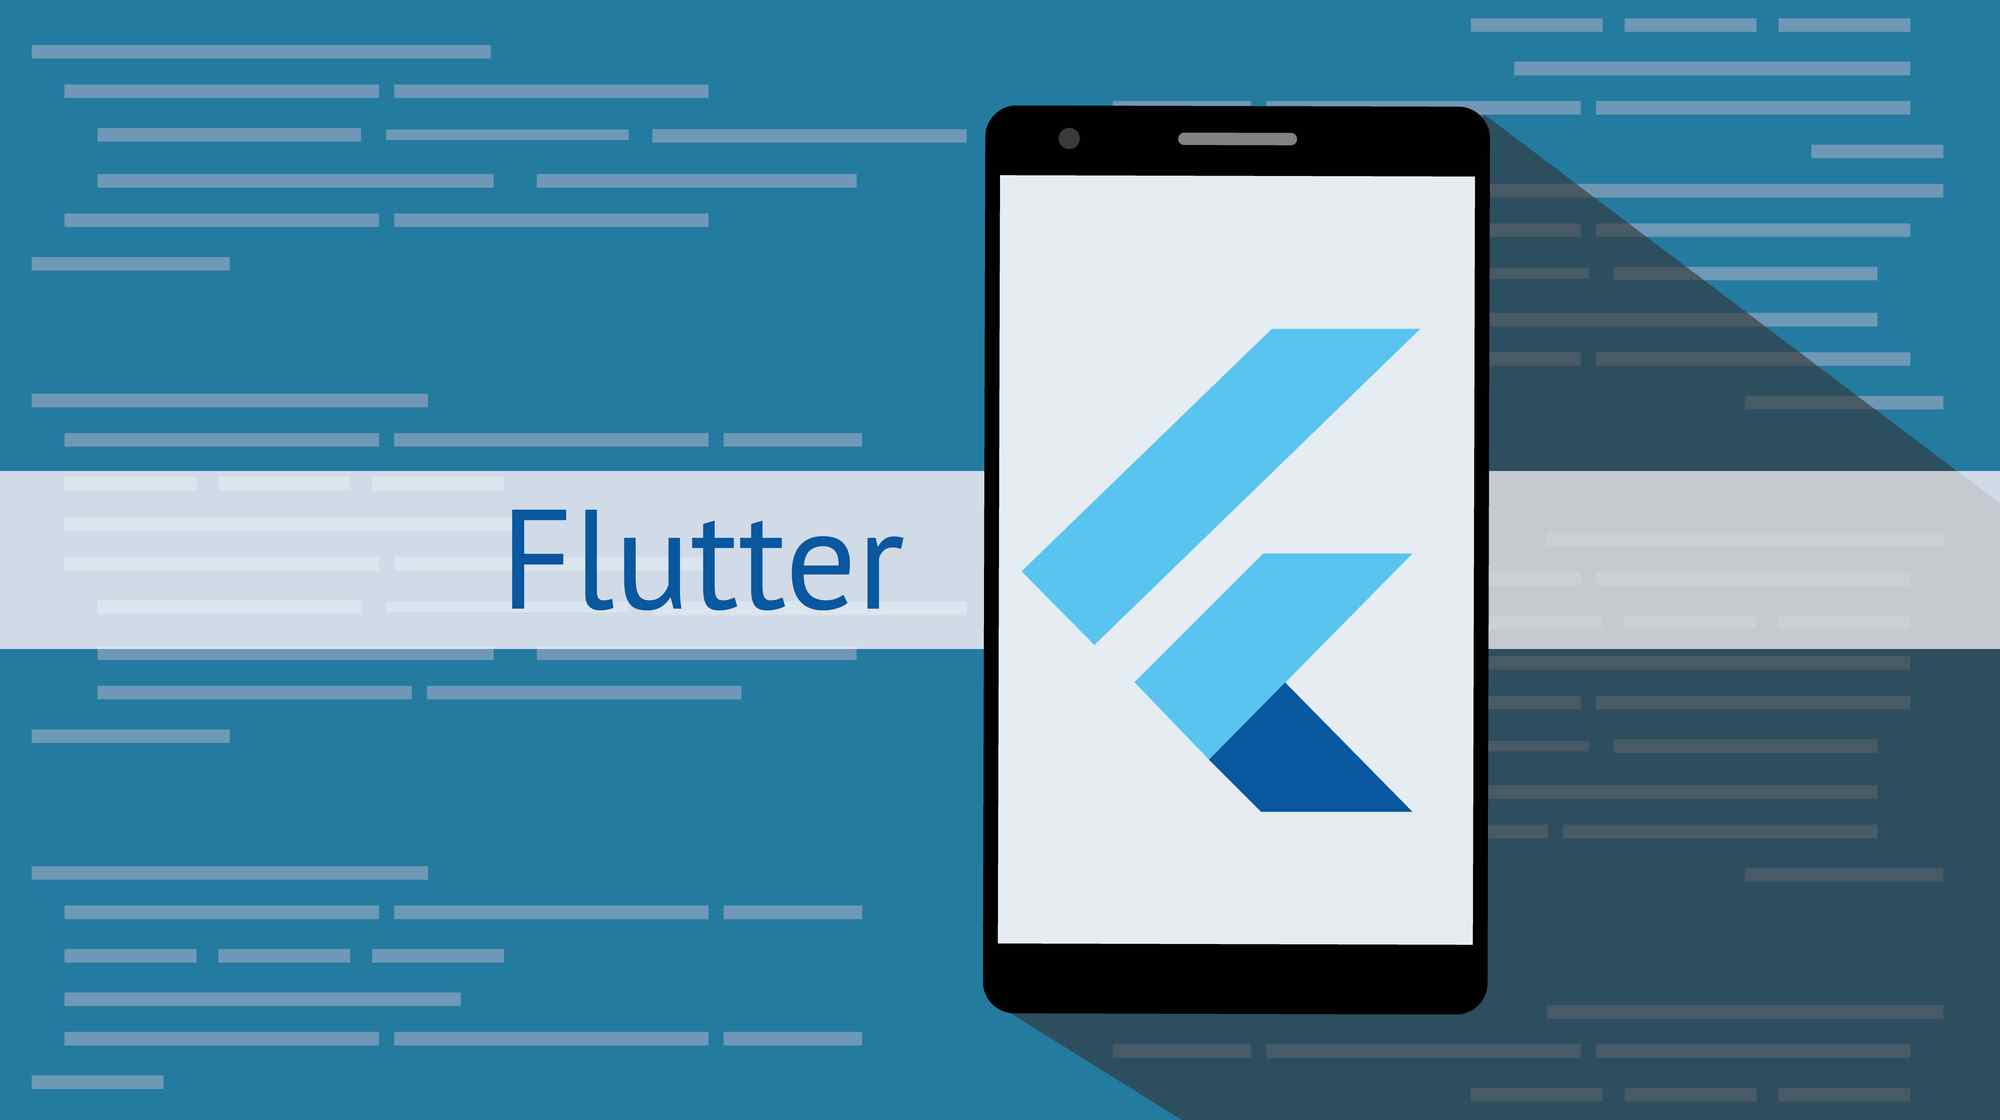 <strong>The Most Used Cross-Platform Framework or Where to Hire Flutter App Developers</strong>